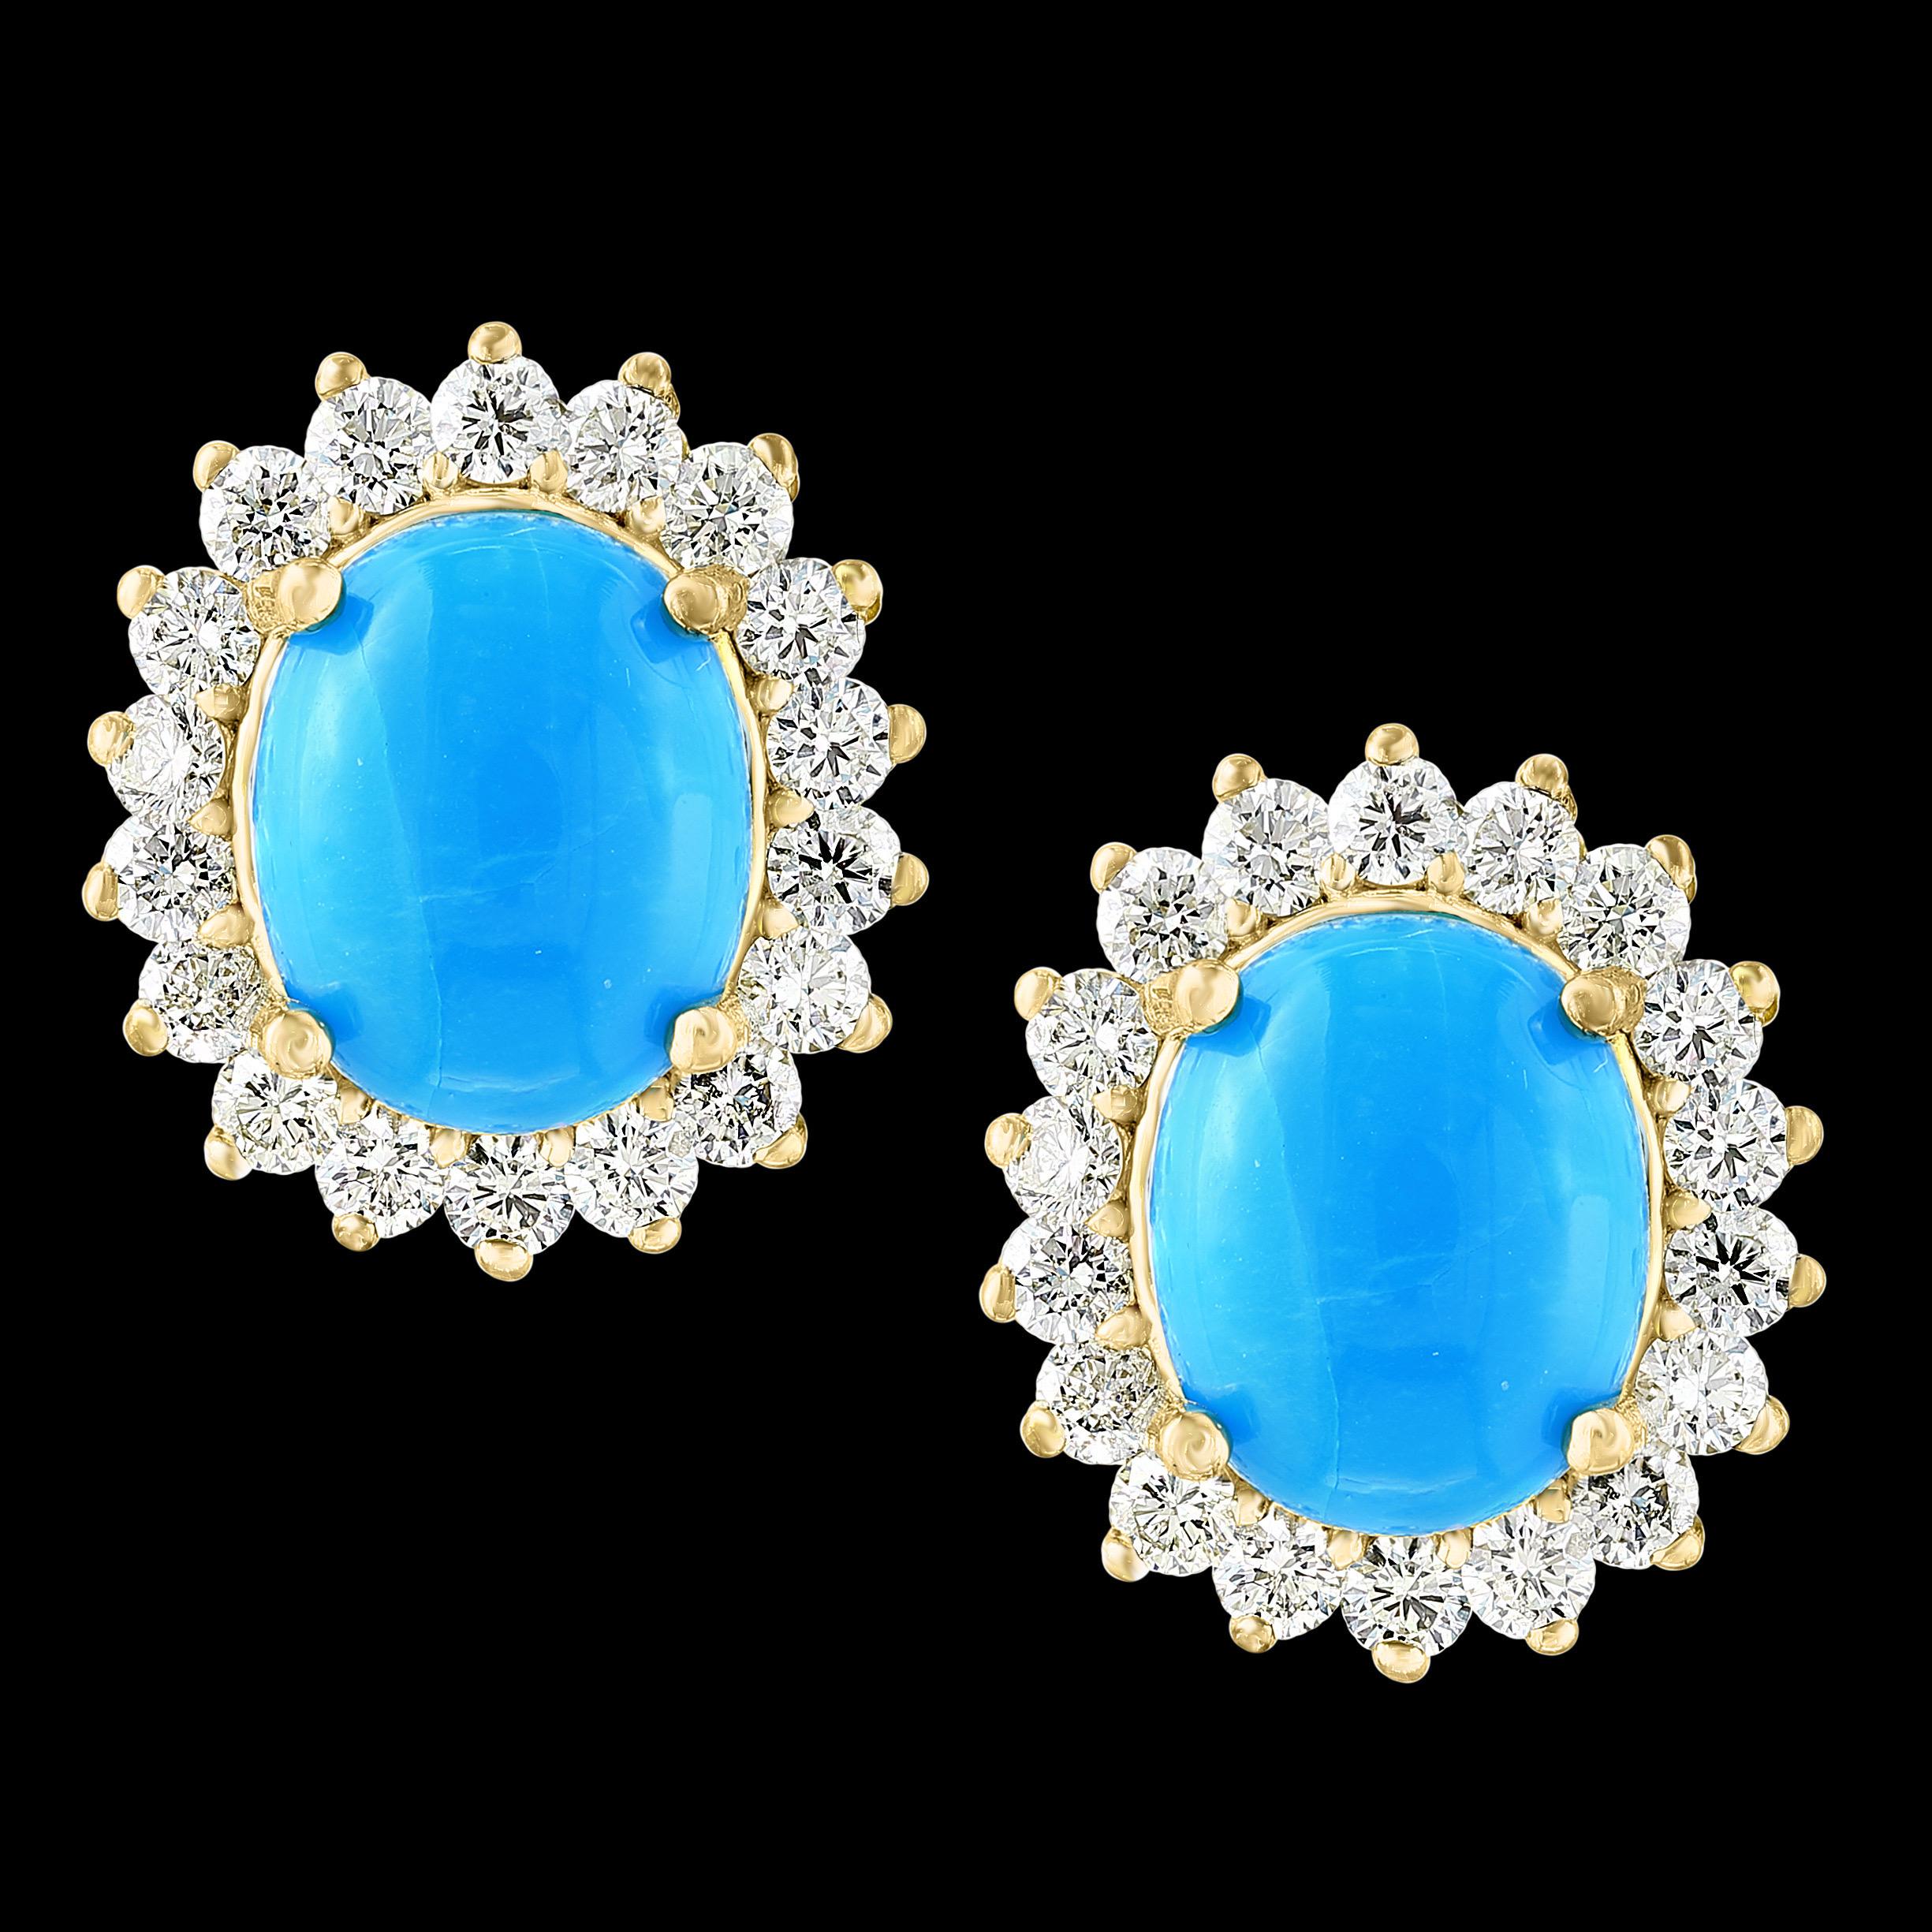 8 Ct Oval Sleeping Beauty Turquoise & 1.5 Ct Diamond Stud Earrings 14 Karat Yellow Gold, Post Back
This exquisite pair of earrings are beautifully crafted with 14 karat Yellow gold .
Weight of 14 K gold 7.70 Grams
Turquoise pair is natural sleeping